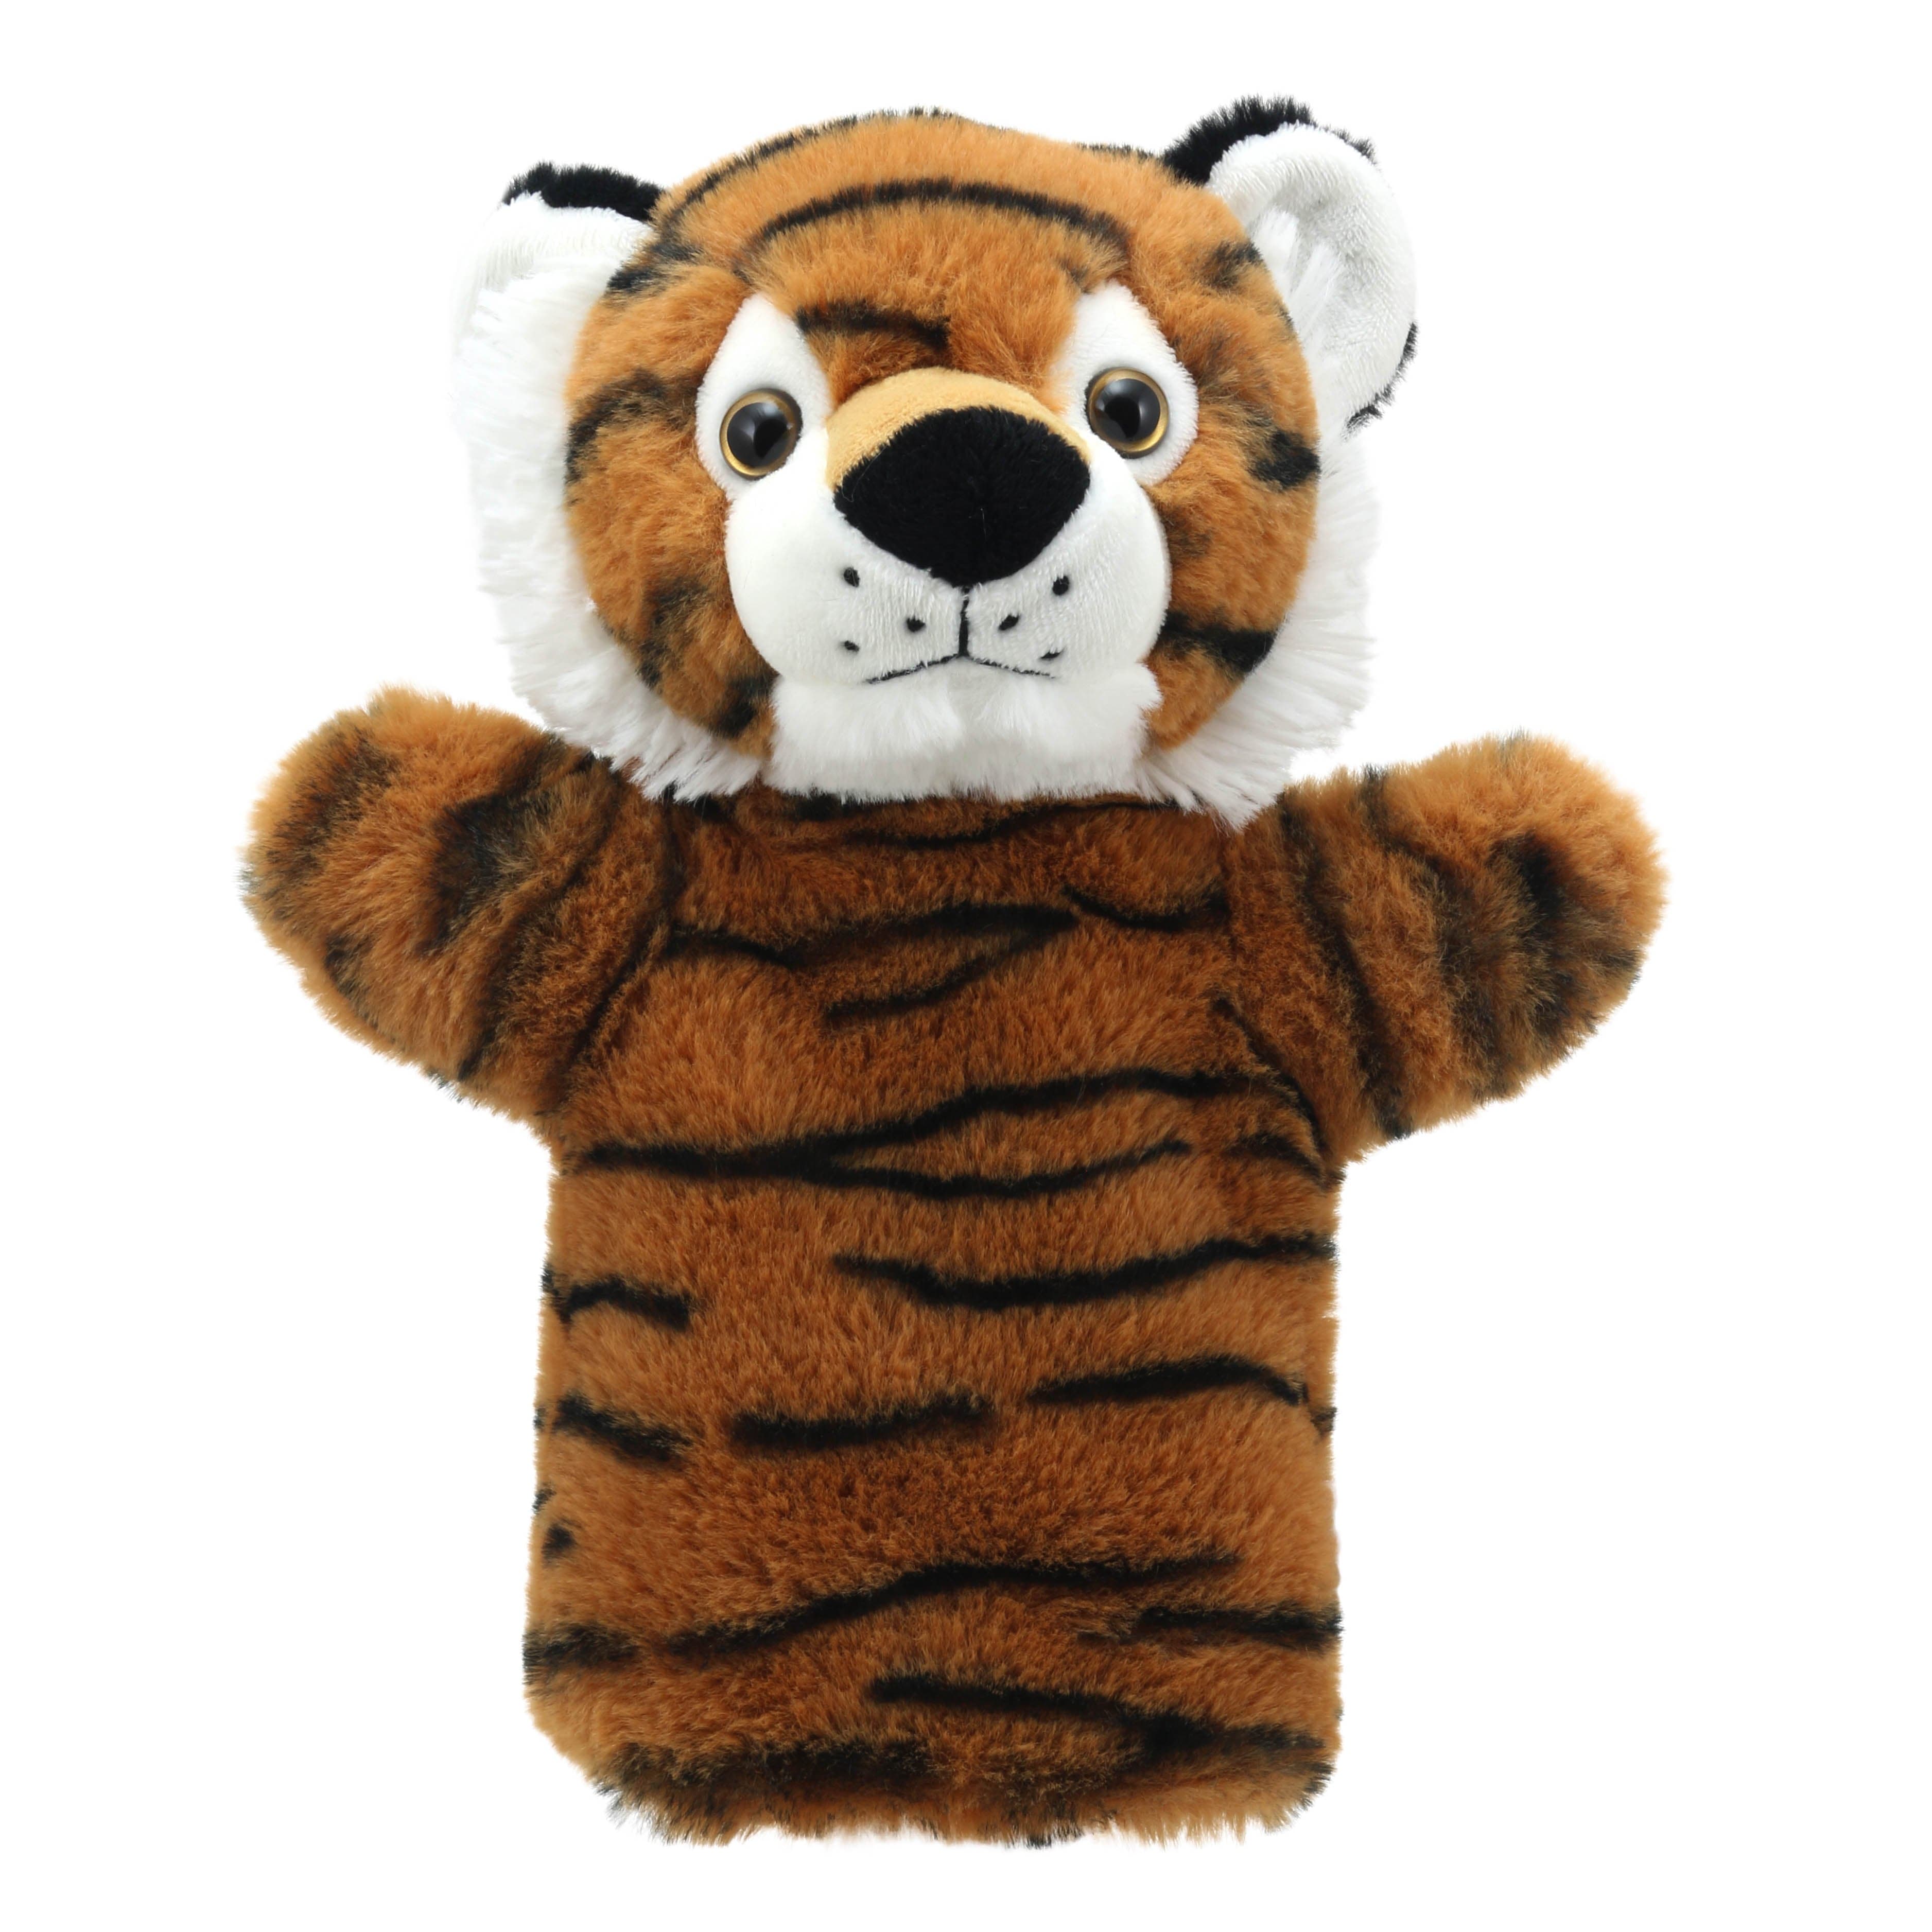 The Puppet Company-Animal Puppet Buddies - Tiger-PC004629-Legacy Toys